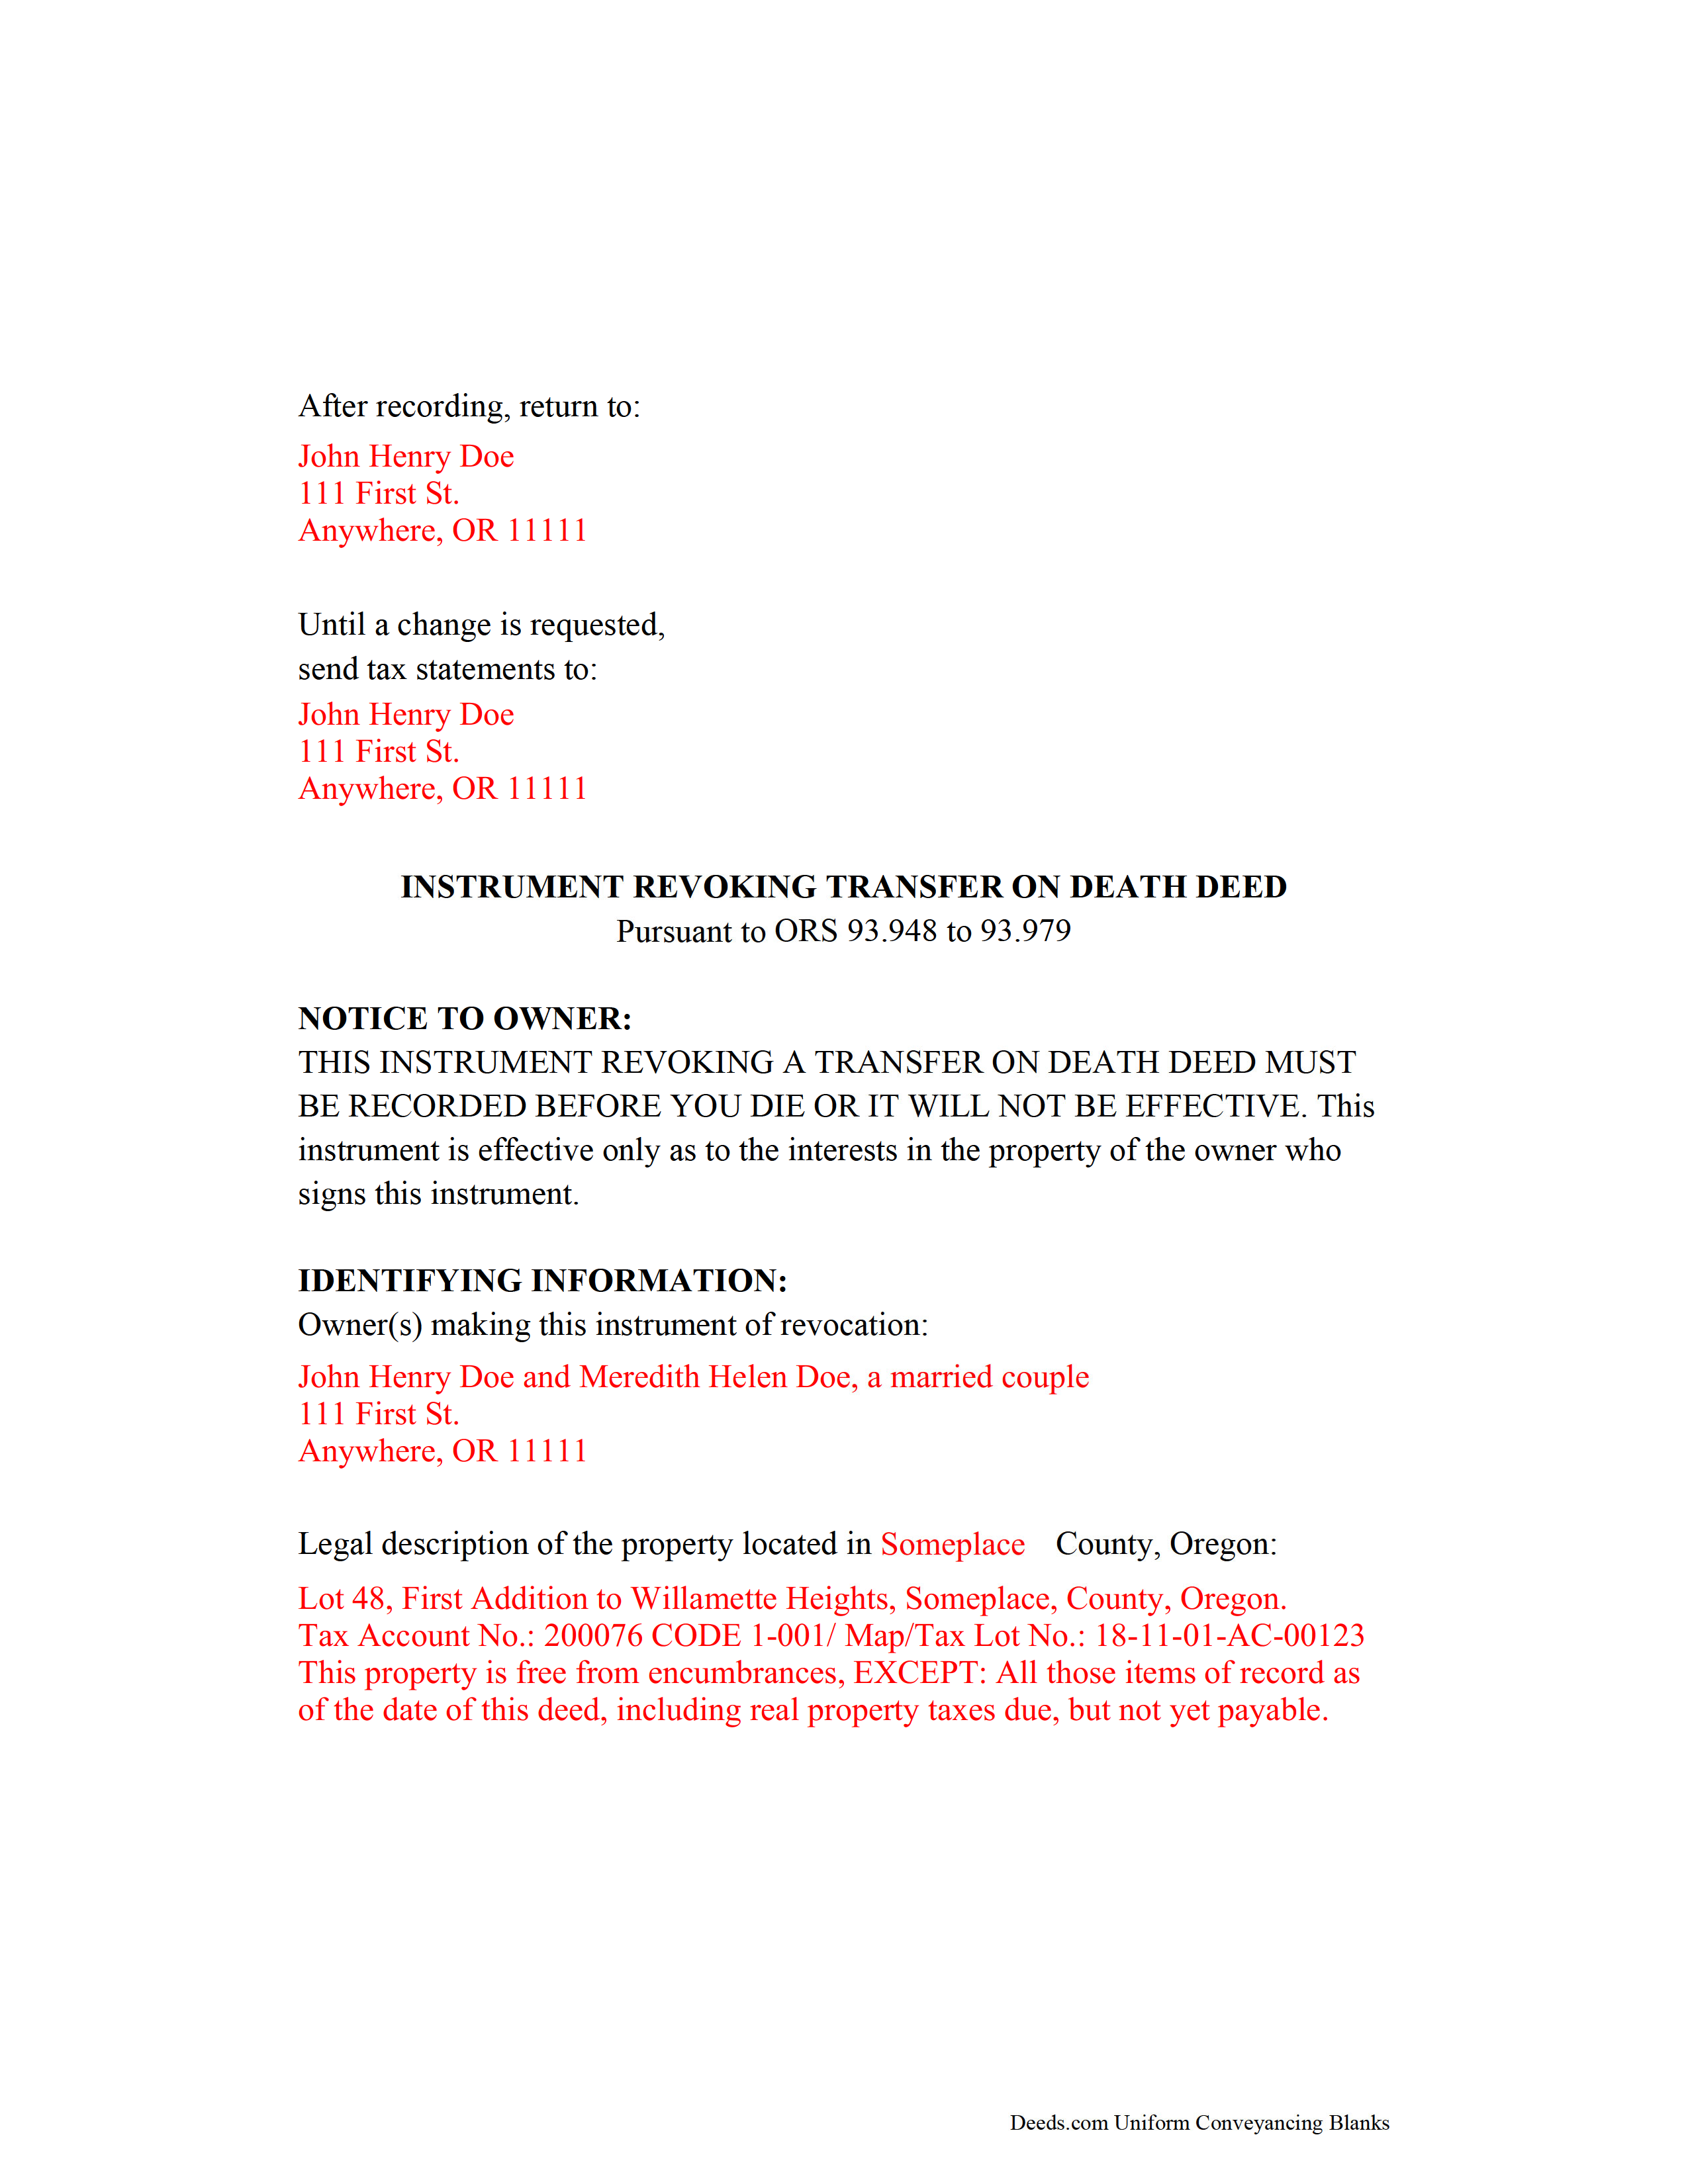 Completed Example of the Transfer on Death Revocation Document